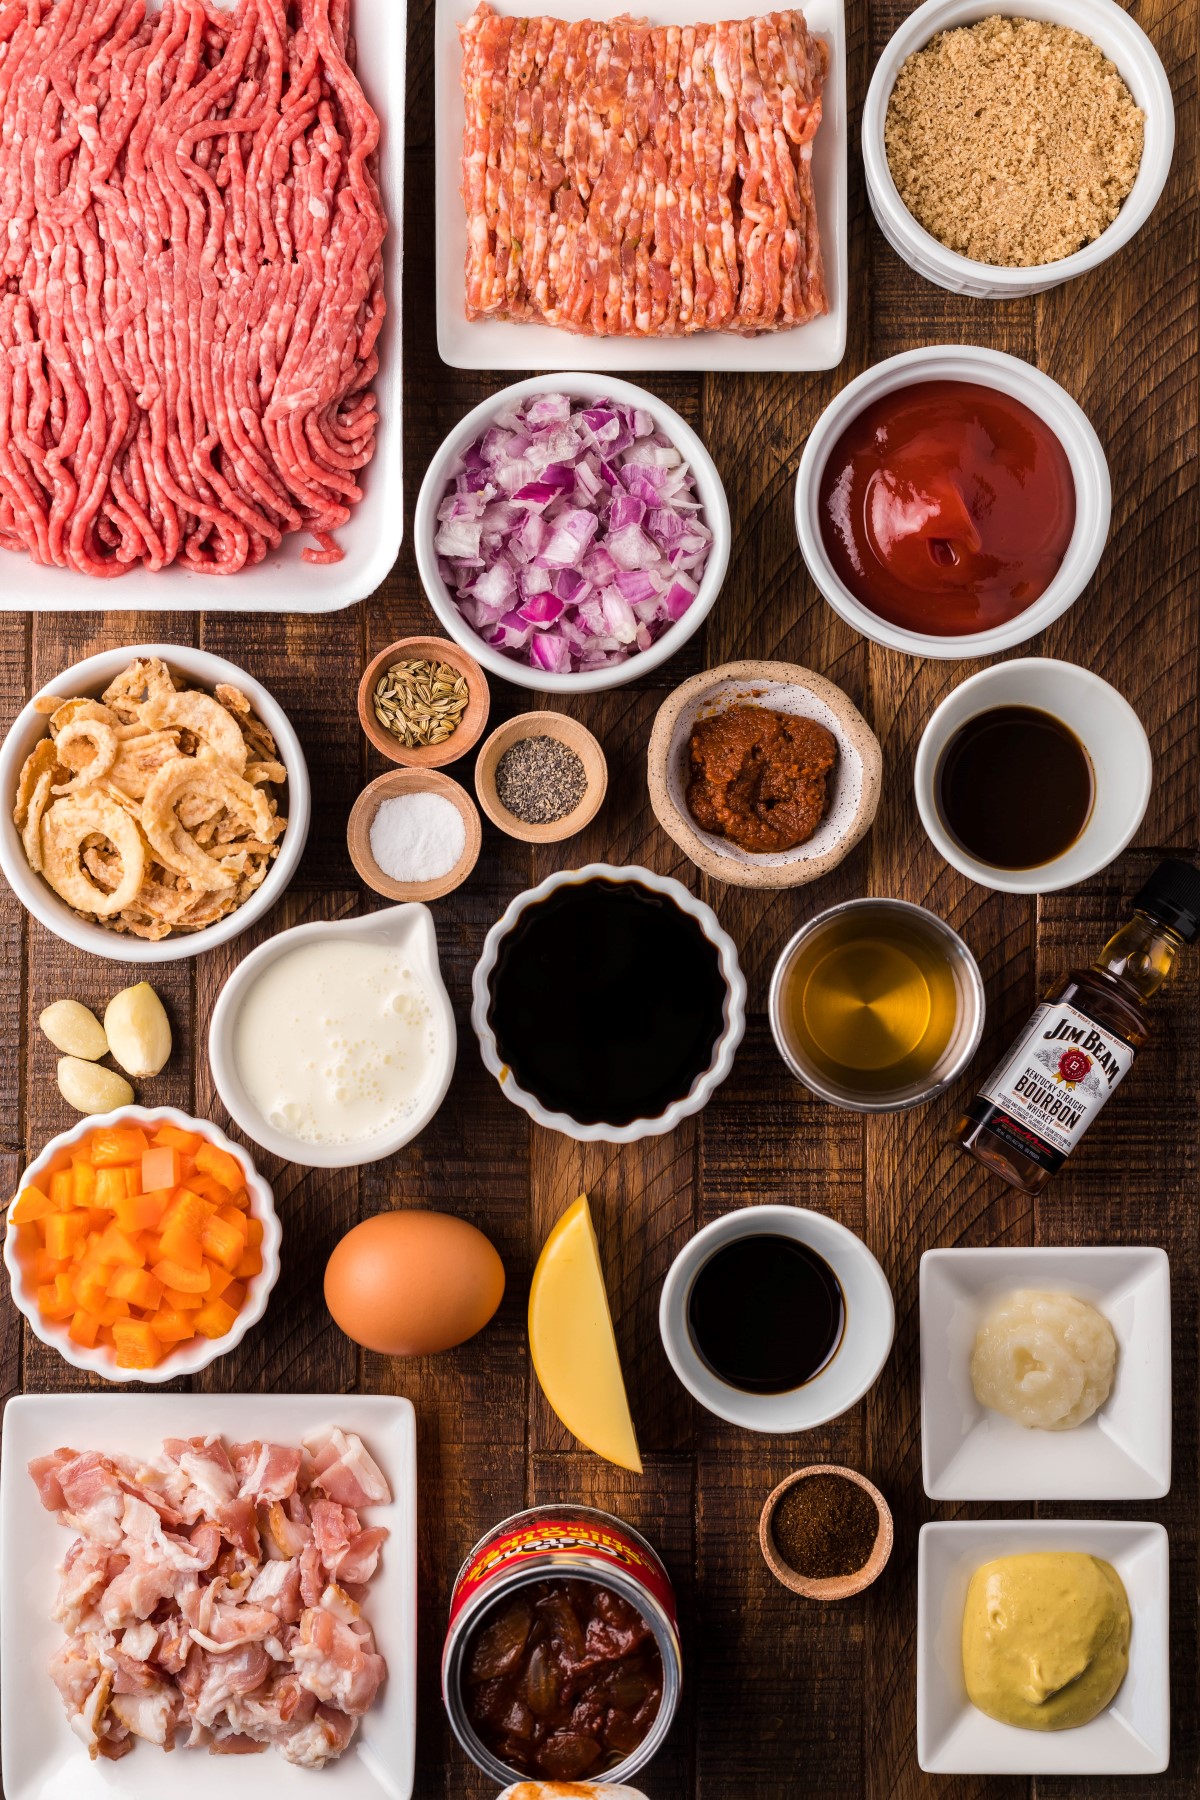 Ingredients to make smoked meatballs laid out on a wooden board.